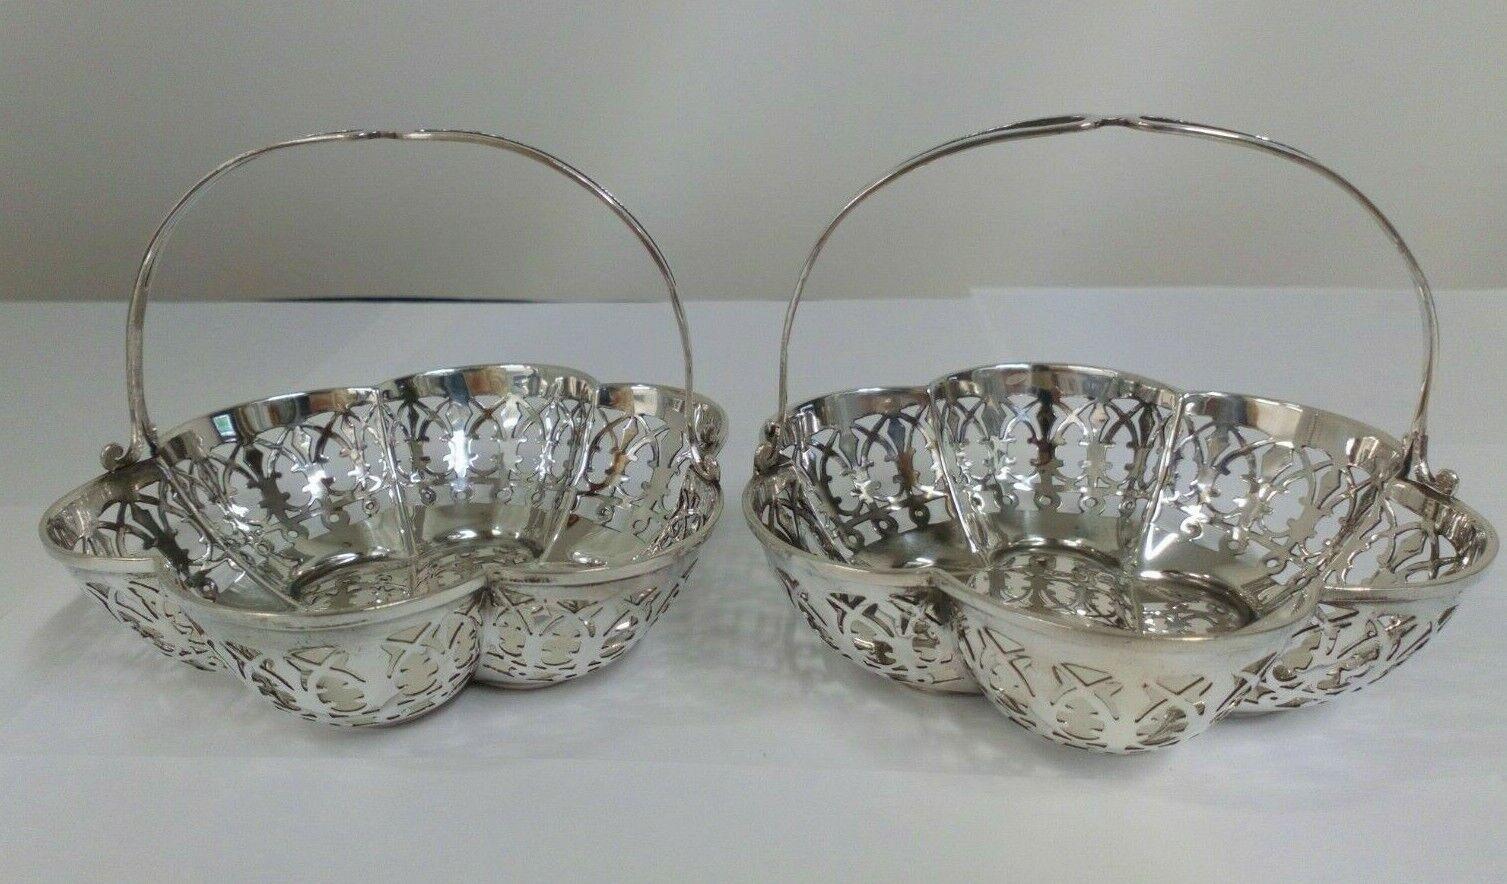 Pair of Pierced Sterling Silver Bonbon Dishes by James Deakin & Sons For Sale 1